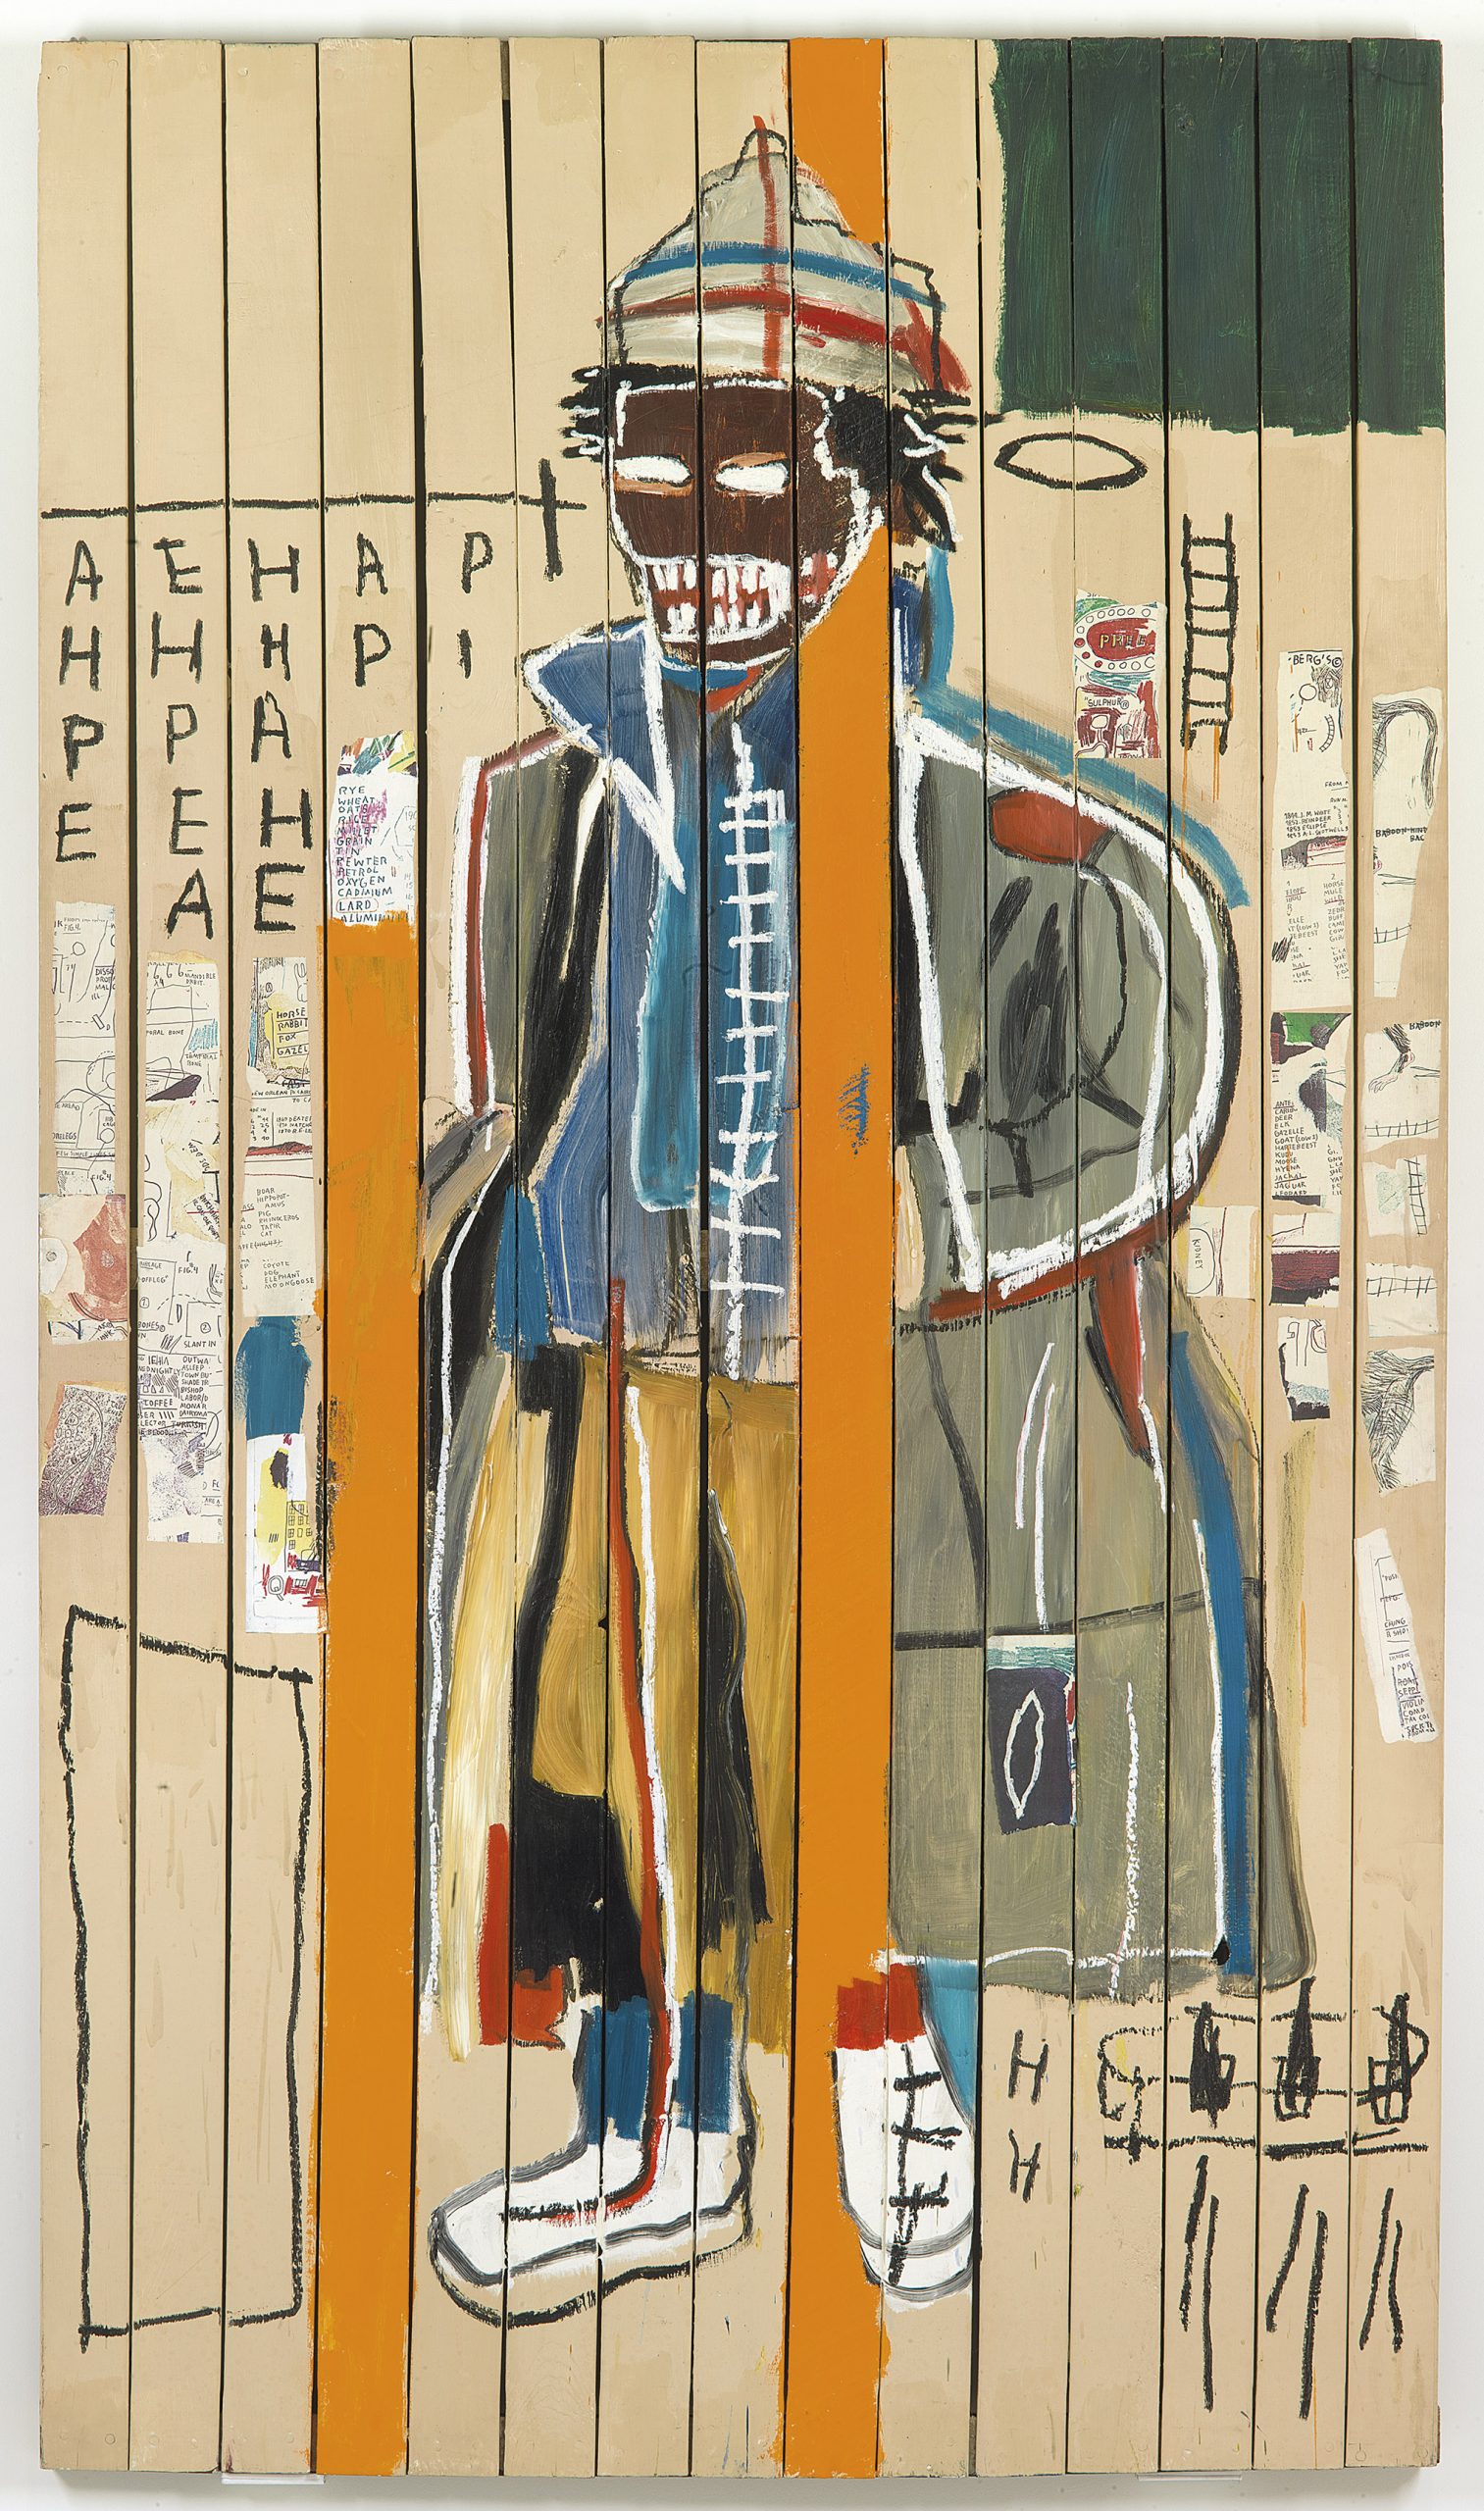 Jean-Michel Basquiat's Life and Times Examined in Two European